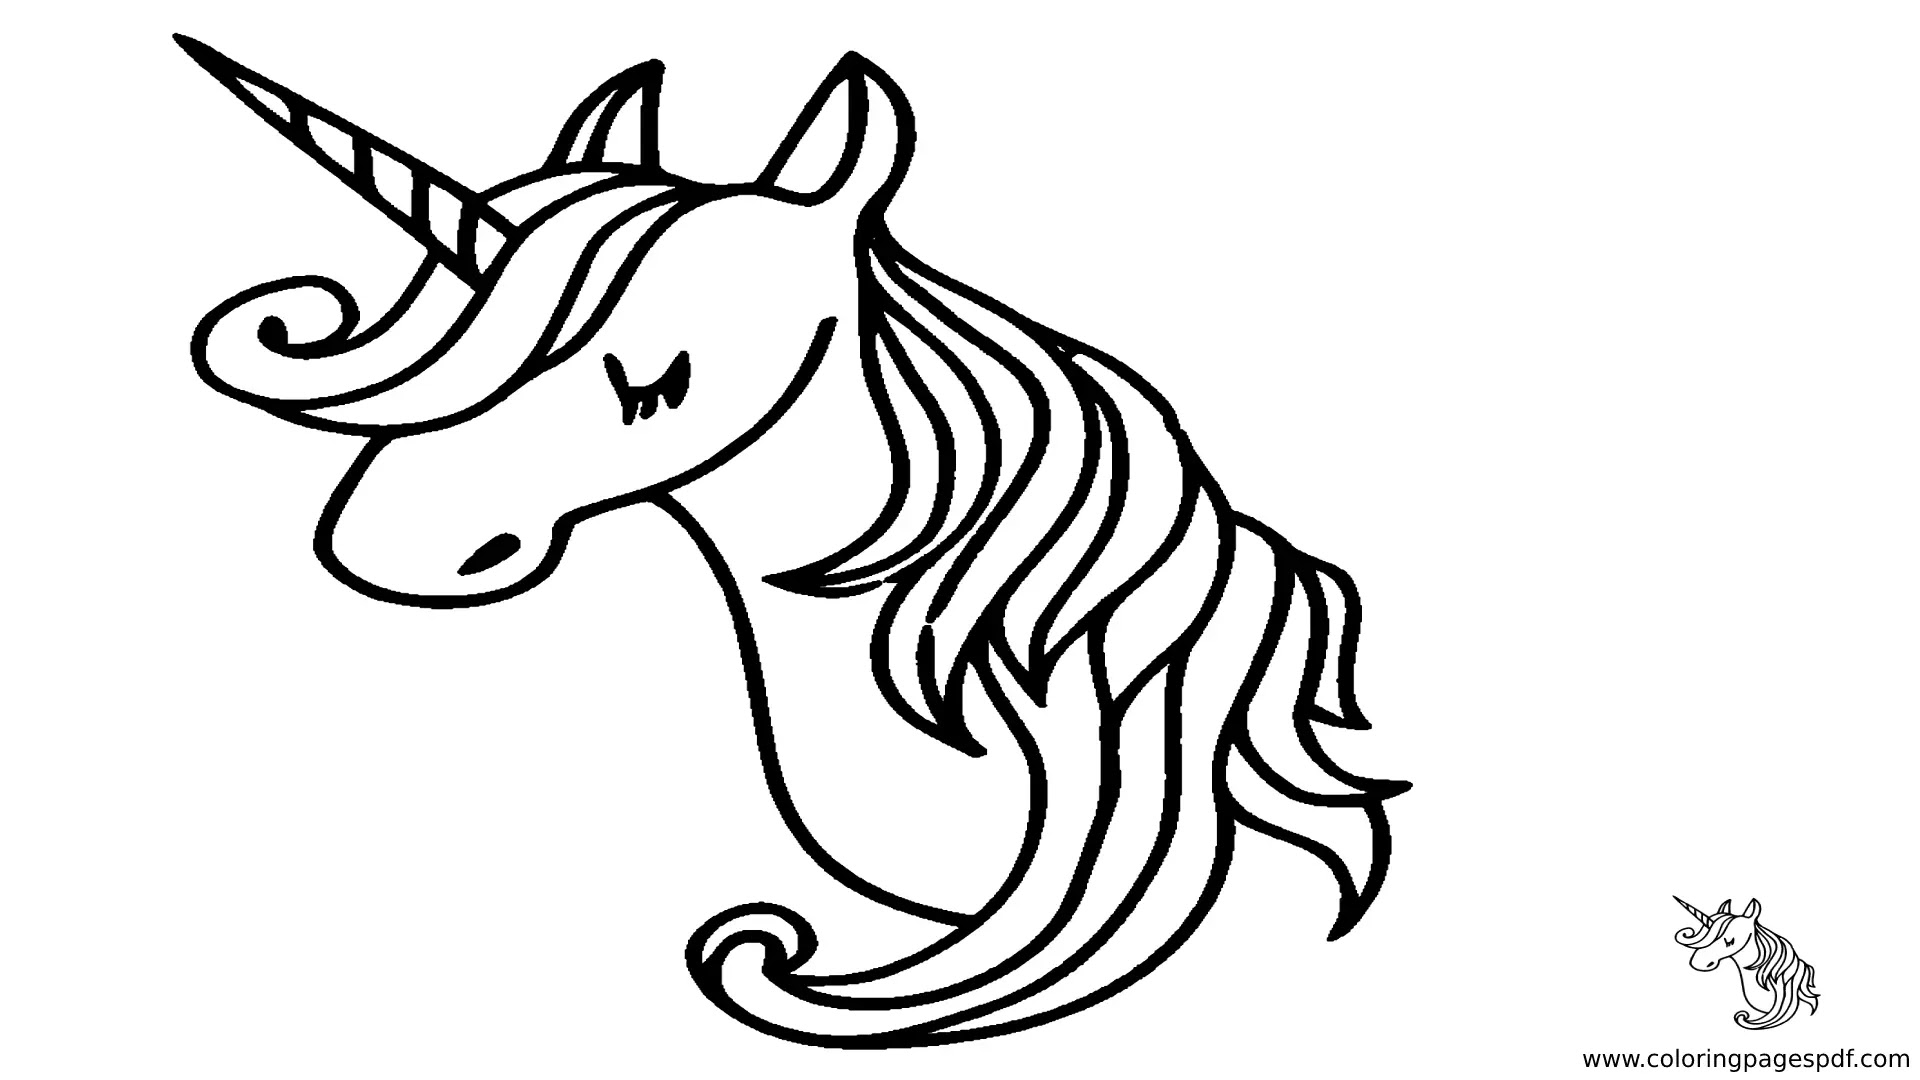 Coloring Pages Of A Unicorn With Eyes Closed